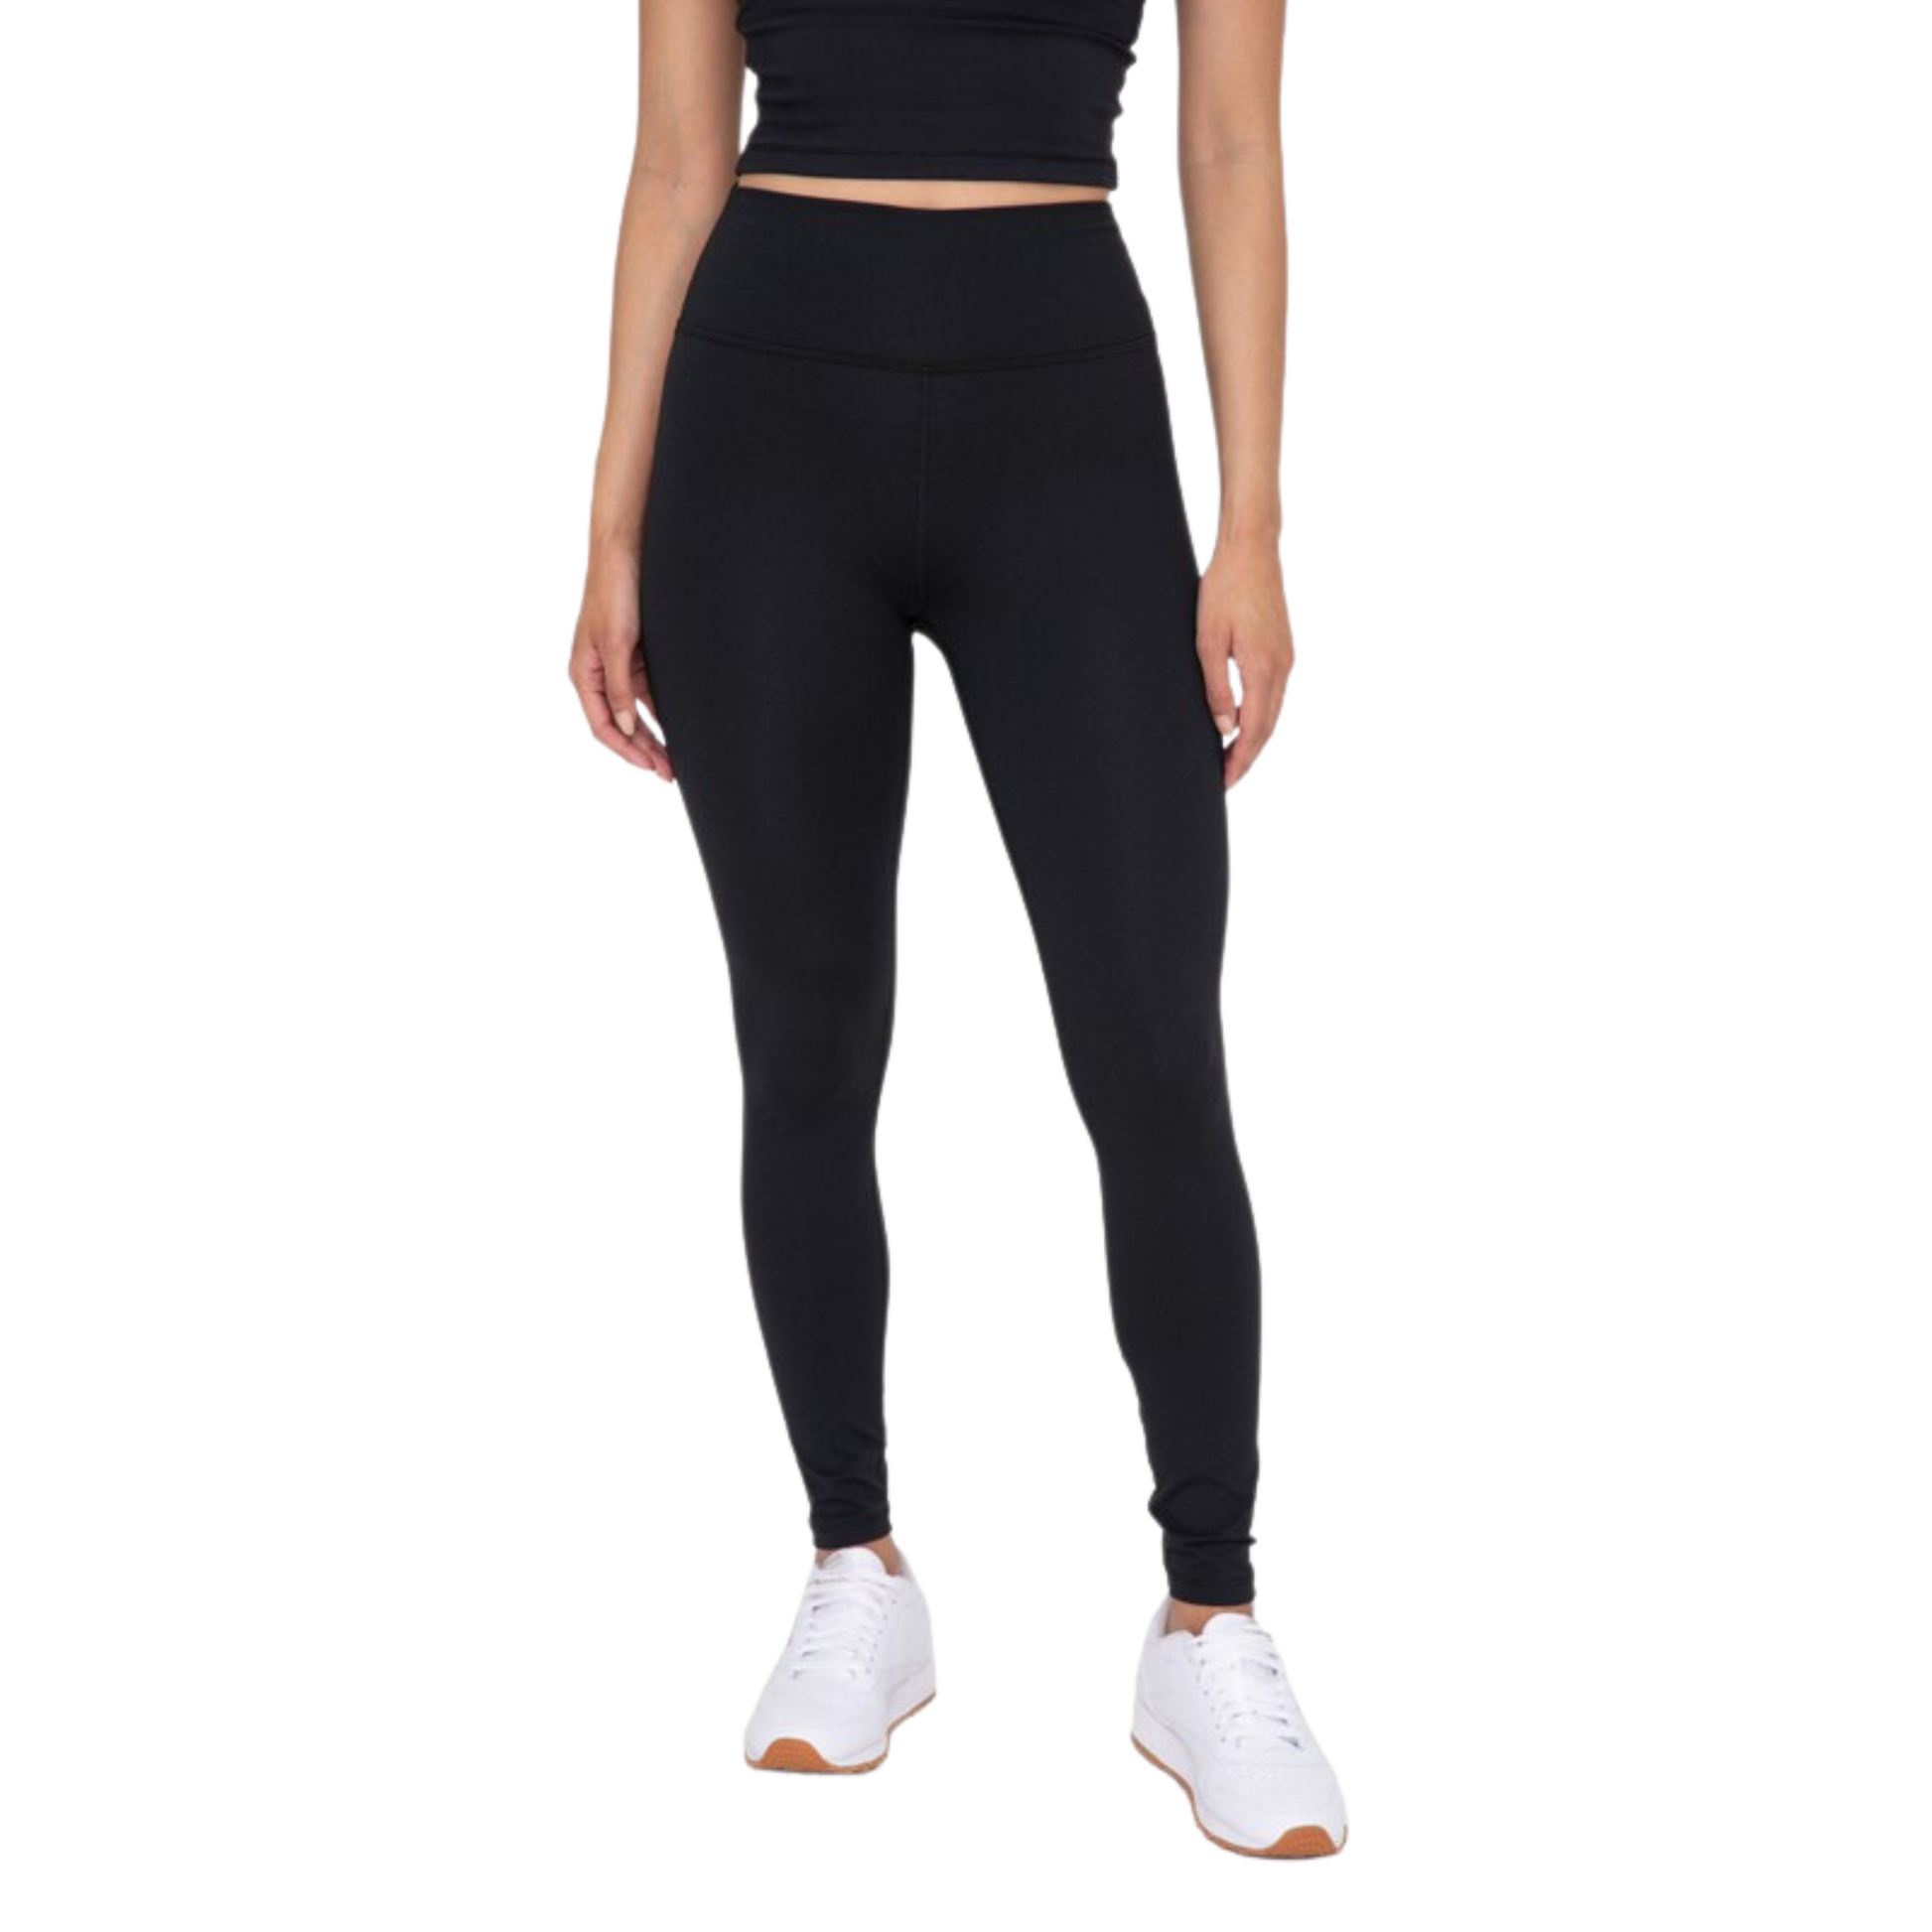 Our Essential Solid Leggings provide a sleek and versatile look. Their full-length design is an ideal choice for all activities, and the mono B tapered waistband offers optimal ab support for unrestricted movement. Crafted without side seams for a streamlined look, these leggings boast superior quality and comfort.